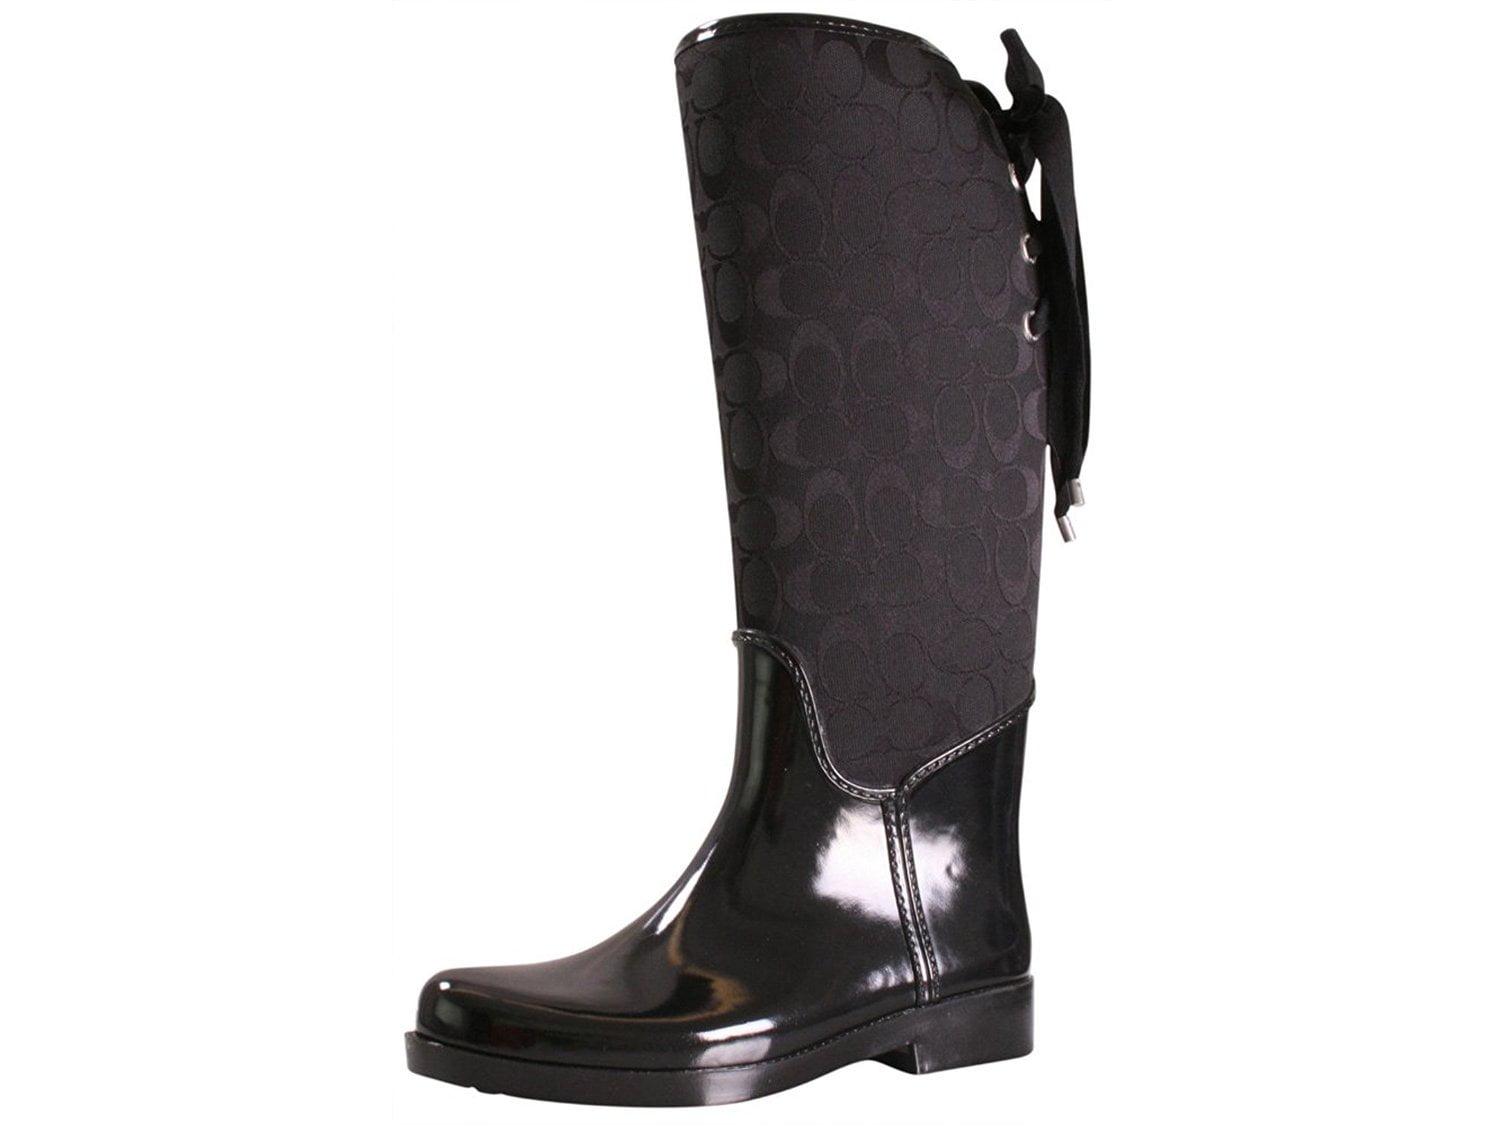 black riding boots size 11